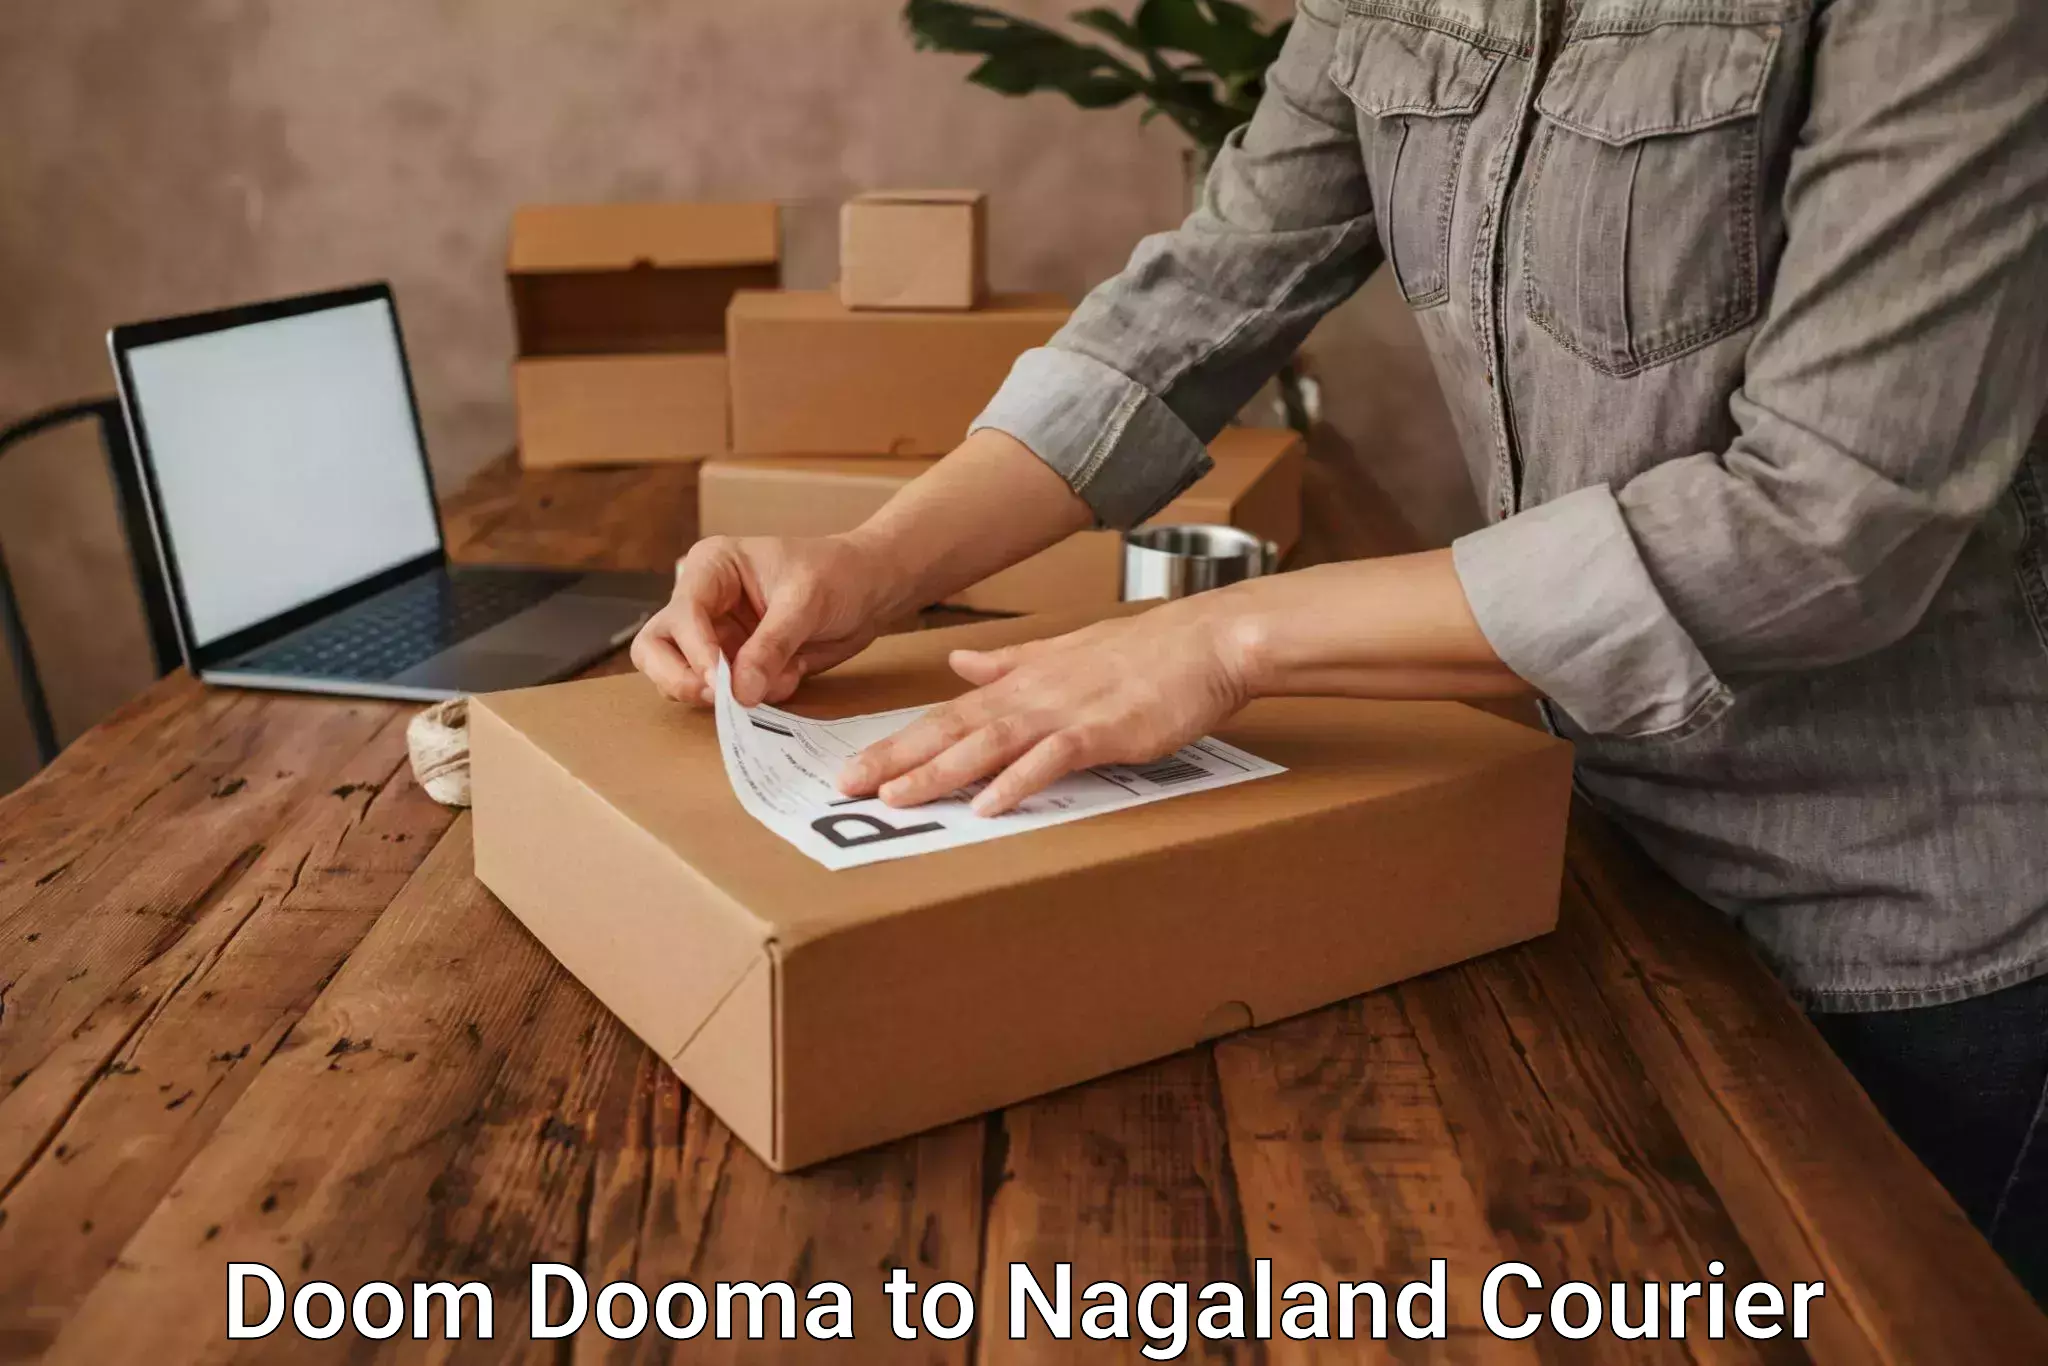 Small parcel delivery Doom Dooma to Nagaland